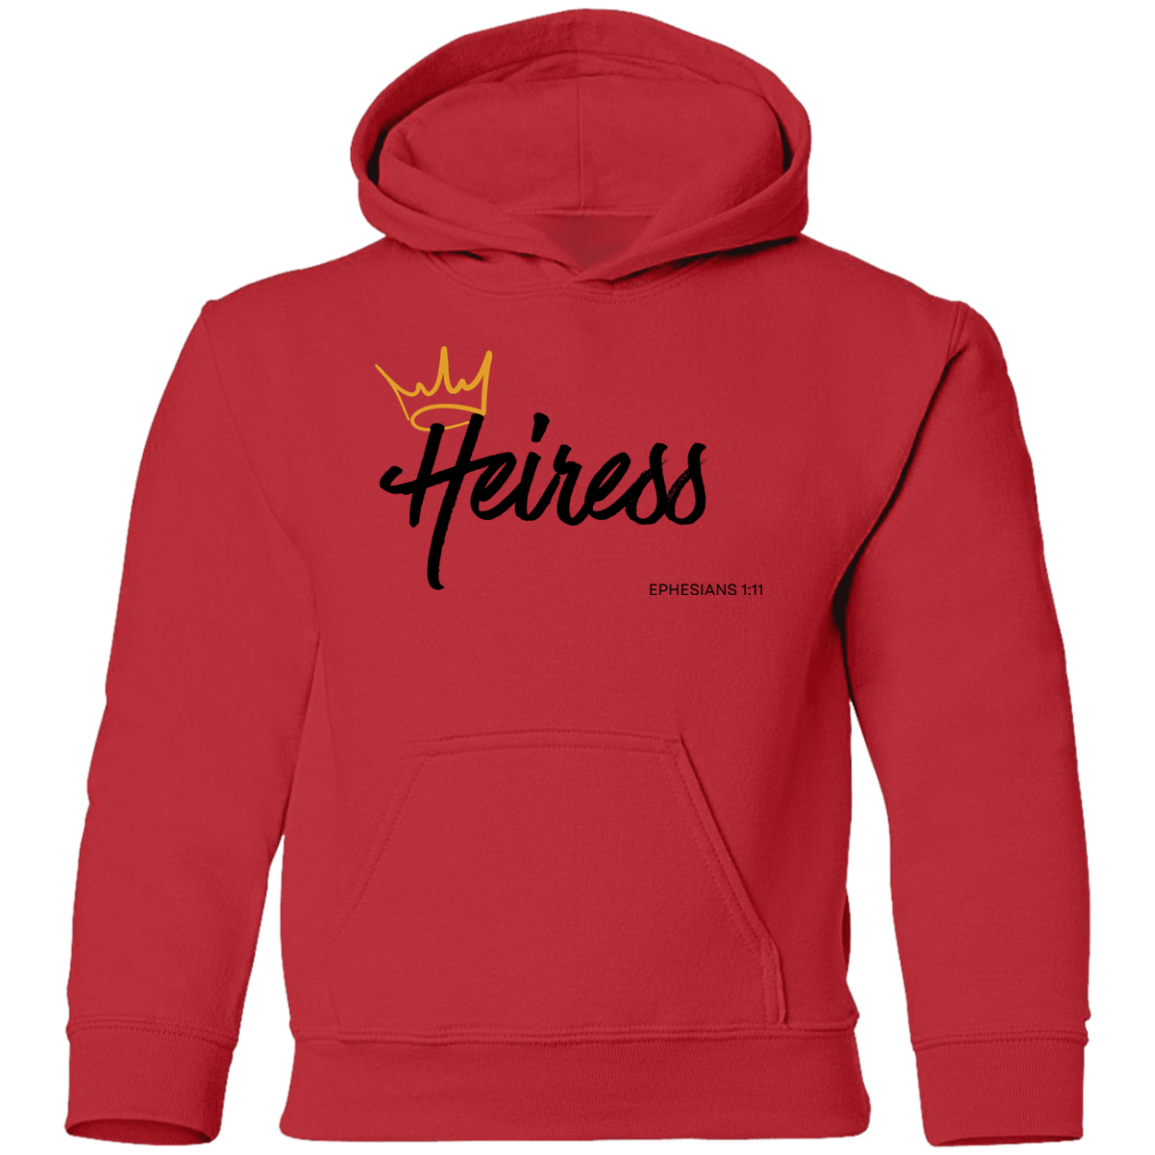 Heiress to Him Eph 1:11 Youth Hoodie